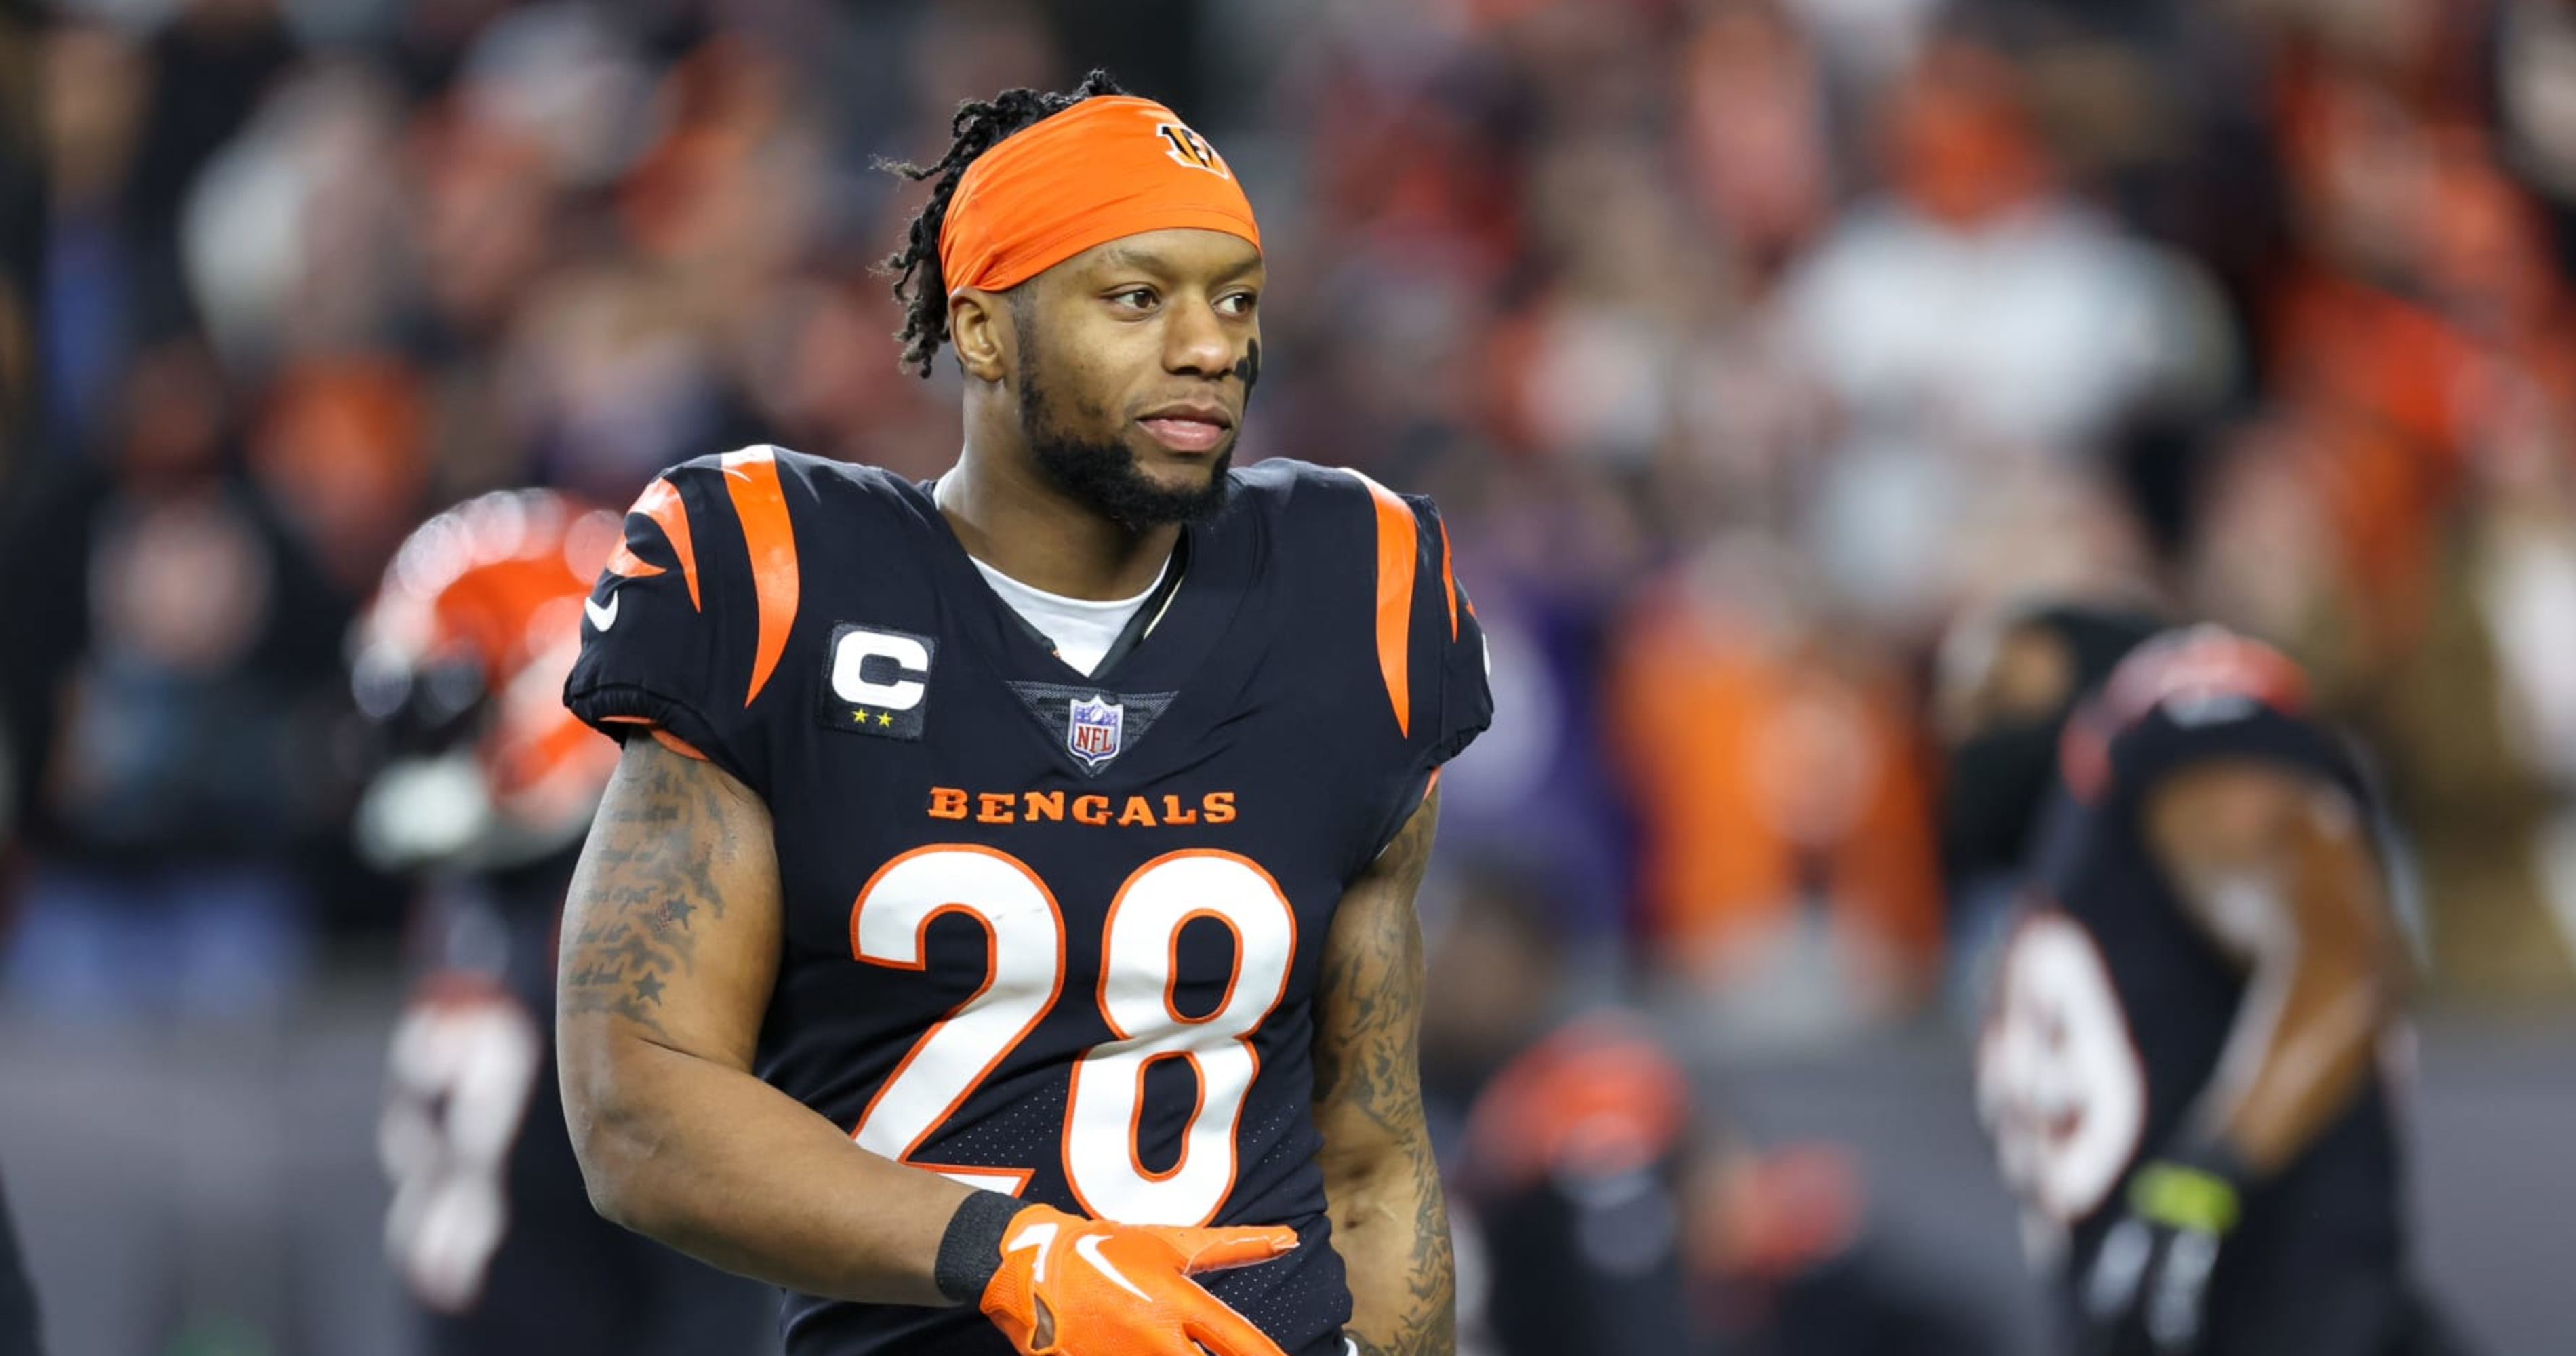 Bengals' Joe Mixon: Selling Tickets to Neutral AFC Championship Is